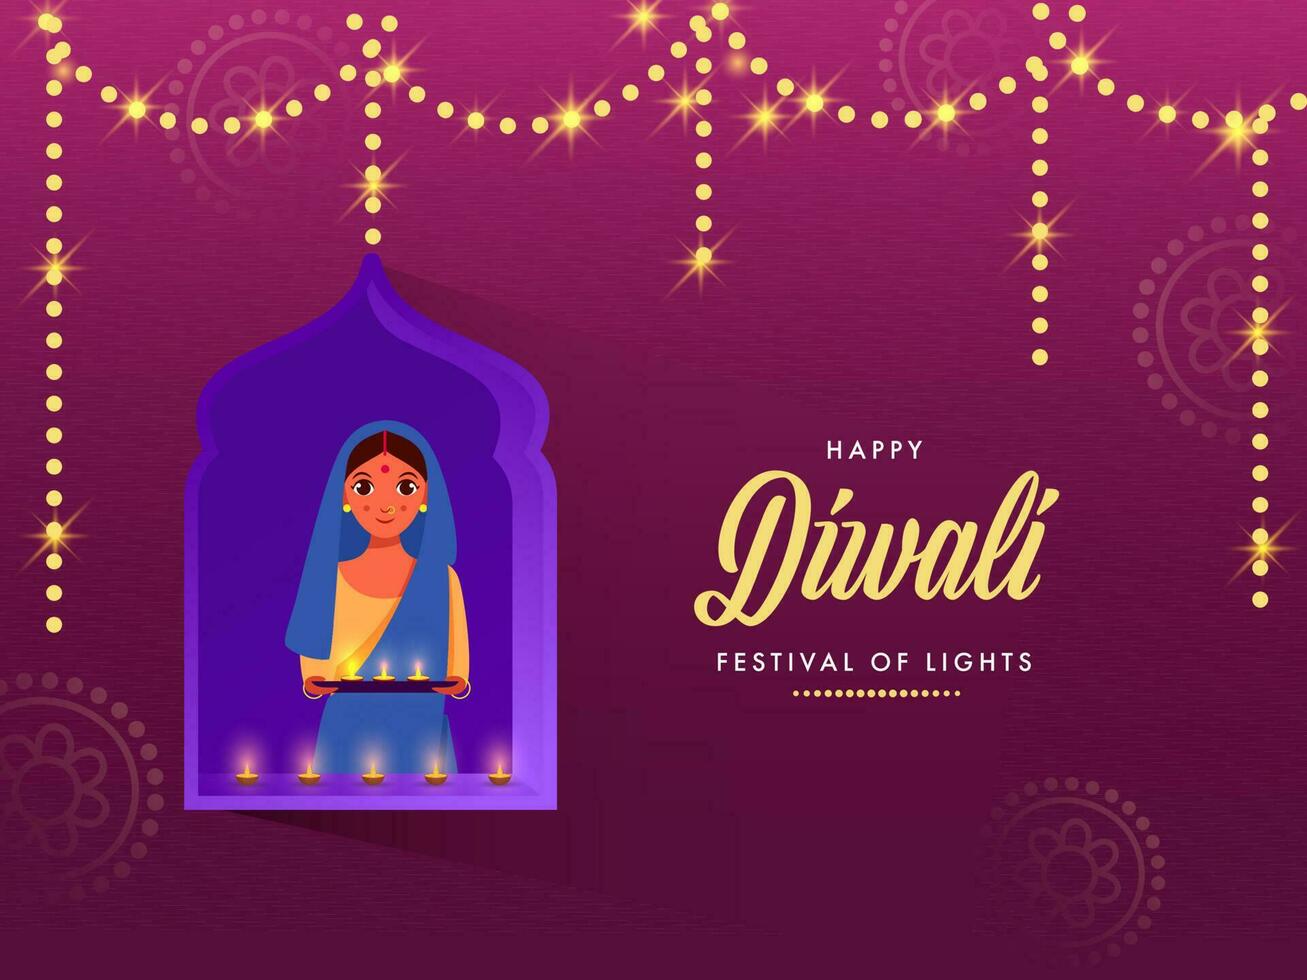 Happy Diwali Concept With Indian Woman Holding Plate Of Lit Oil Lamps And Lighting Garland On Pink Background. vector